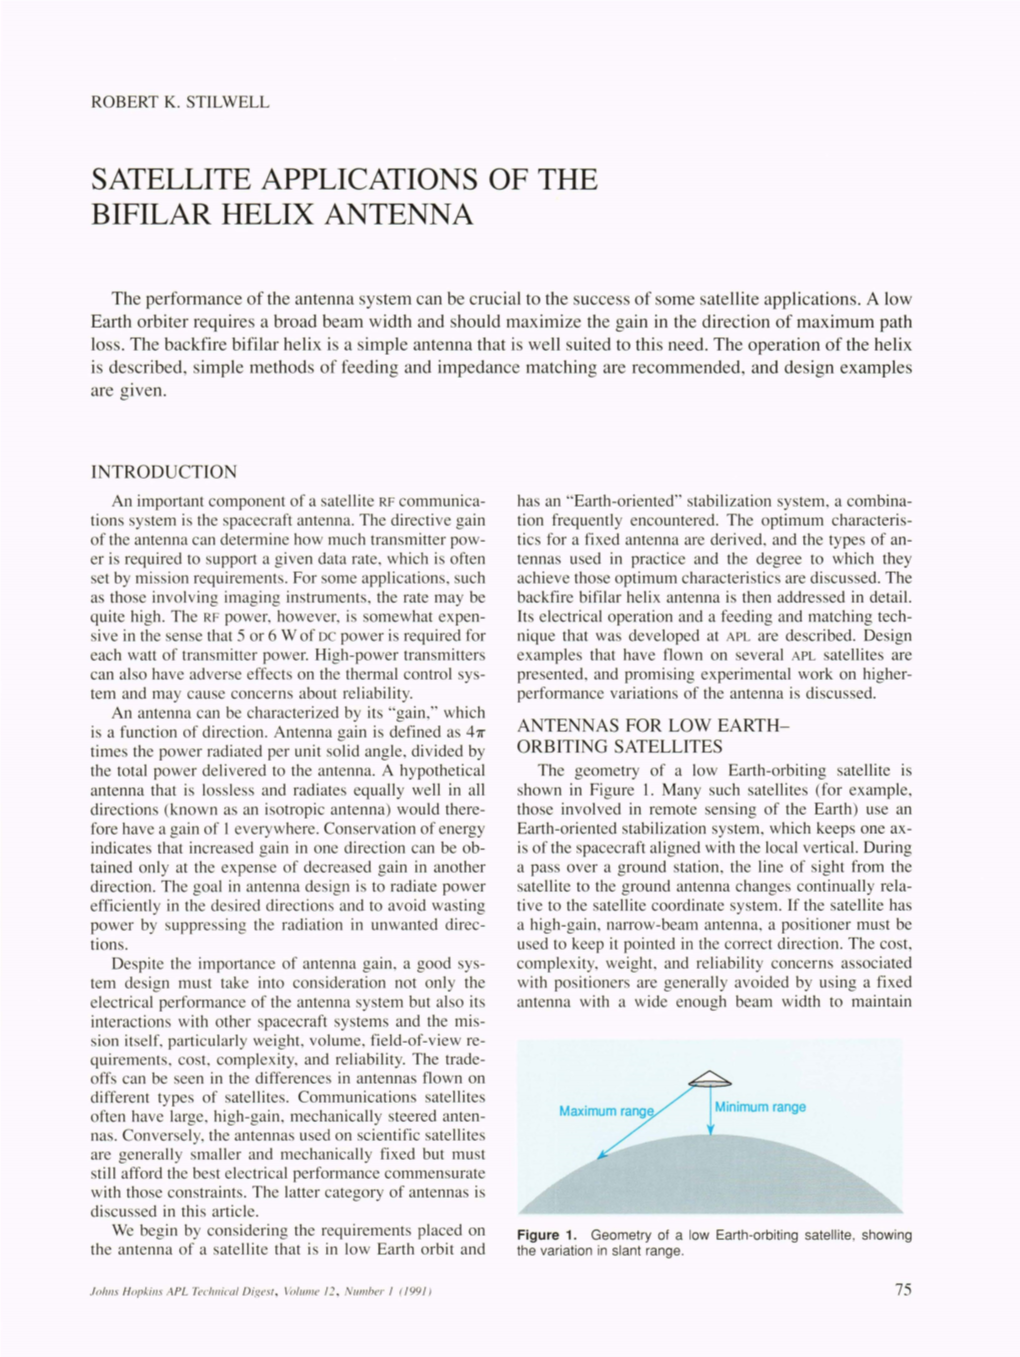 Satellite Applications of the Bifilar Helix Antenna